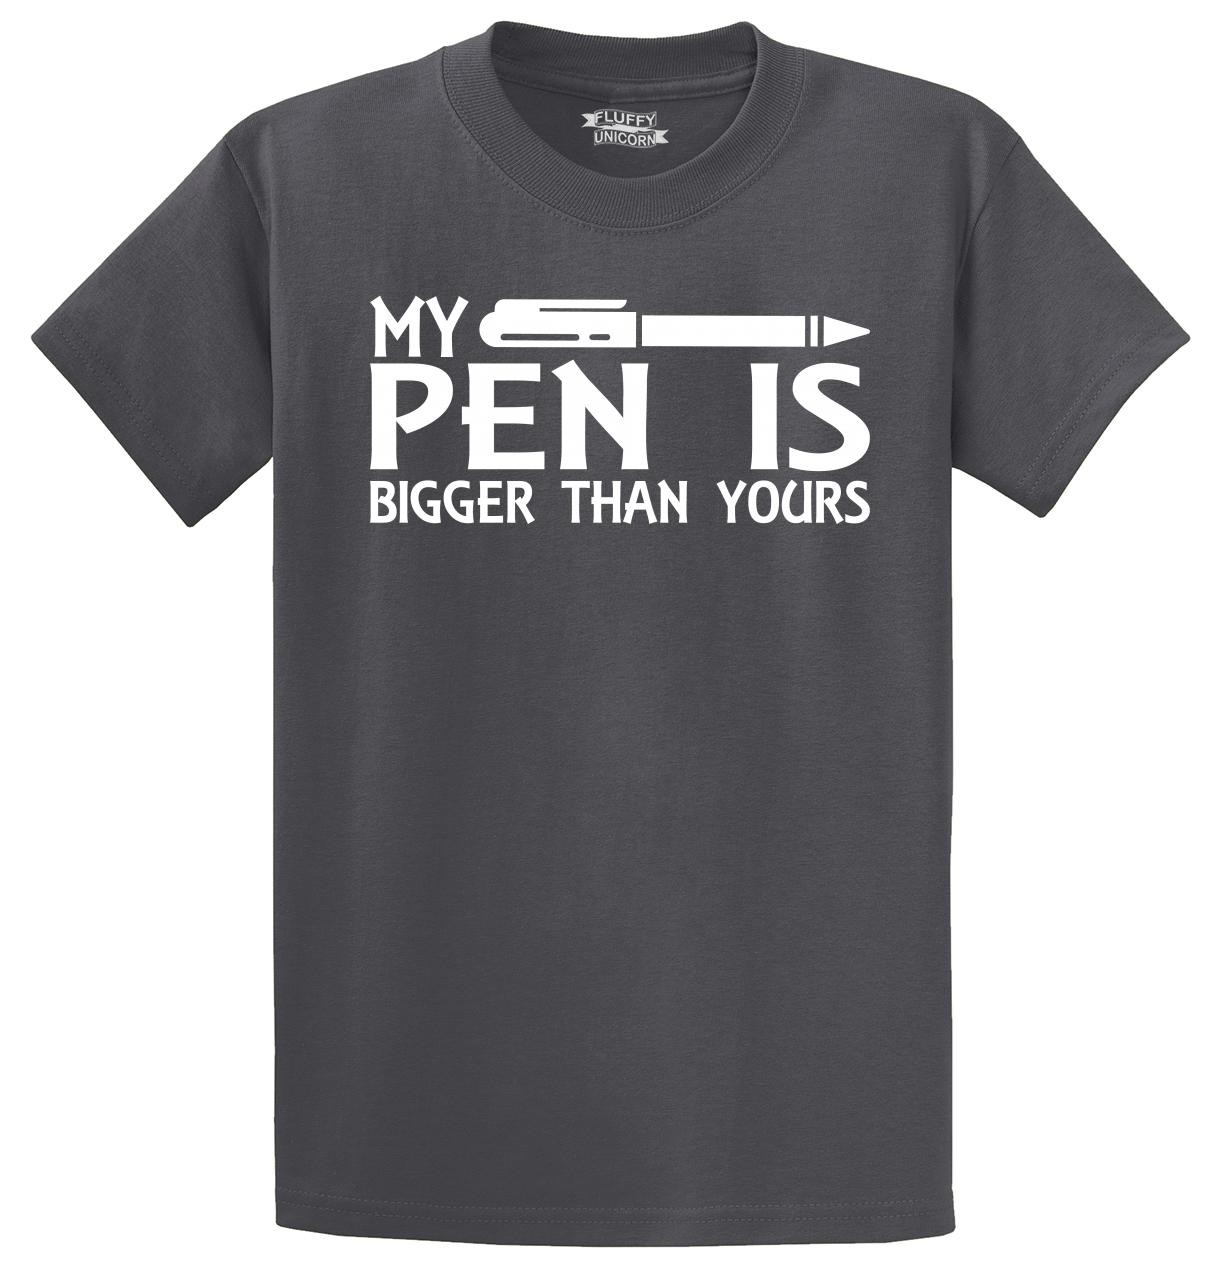 My Pen Is Bigger Than Yours Funny T Shirt Adult Rude Humor Sexual Tee Shirt Ebay